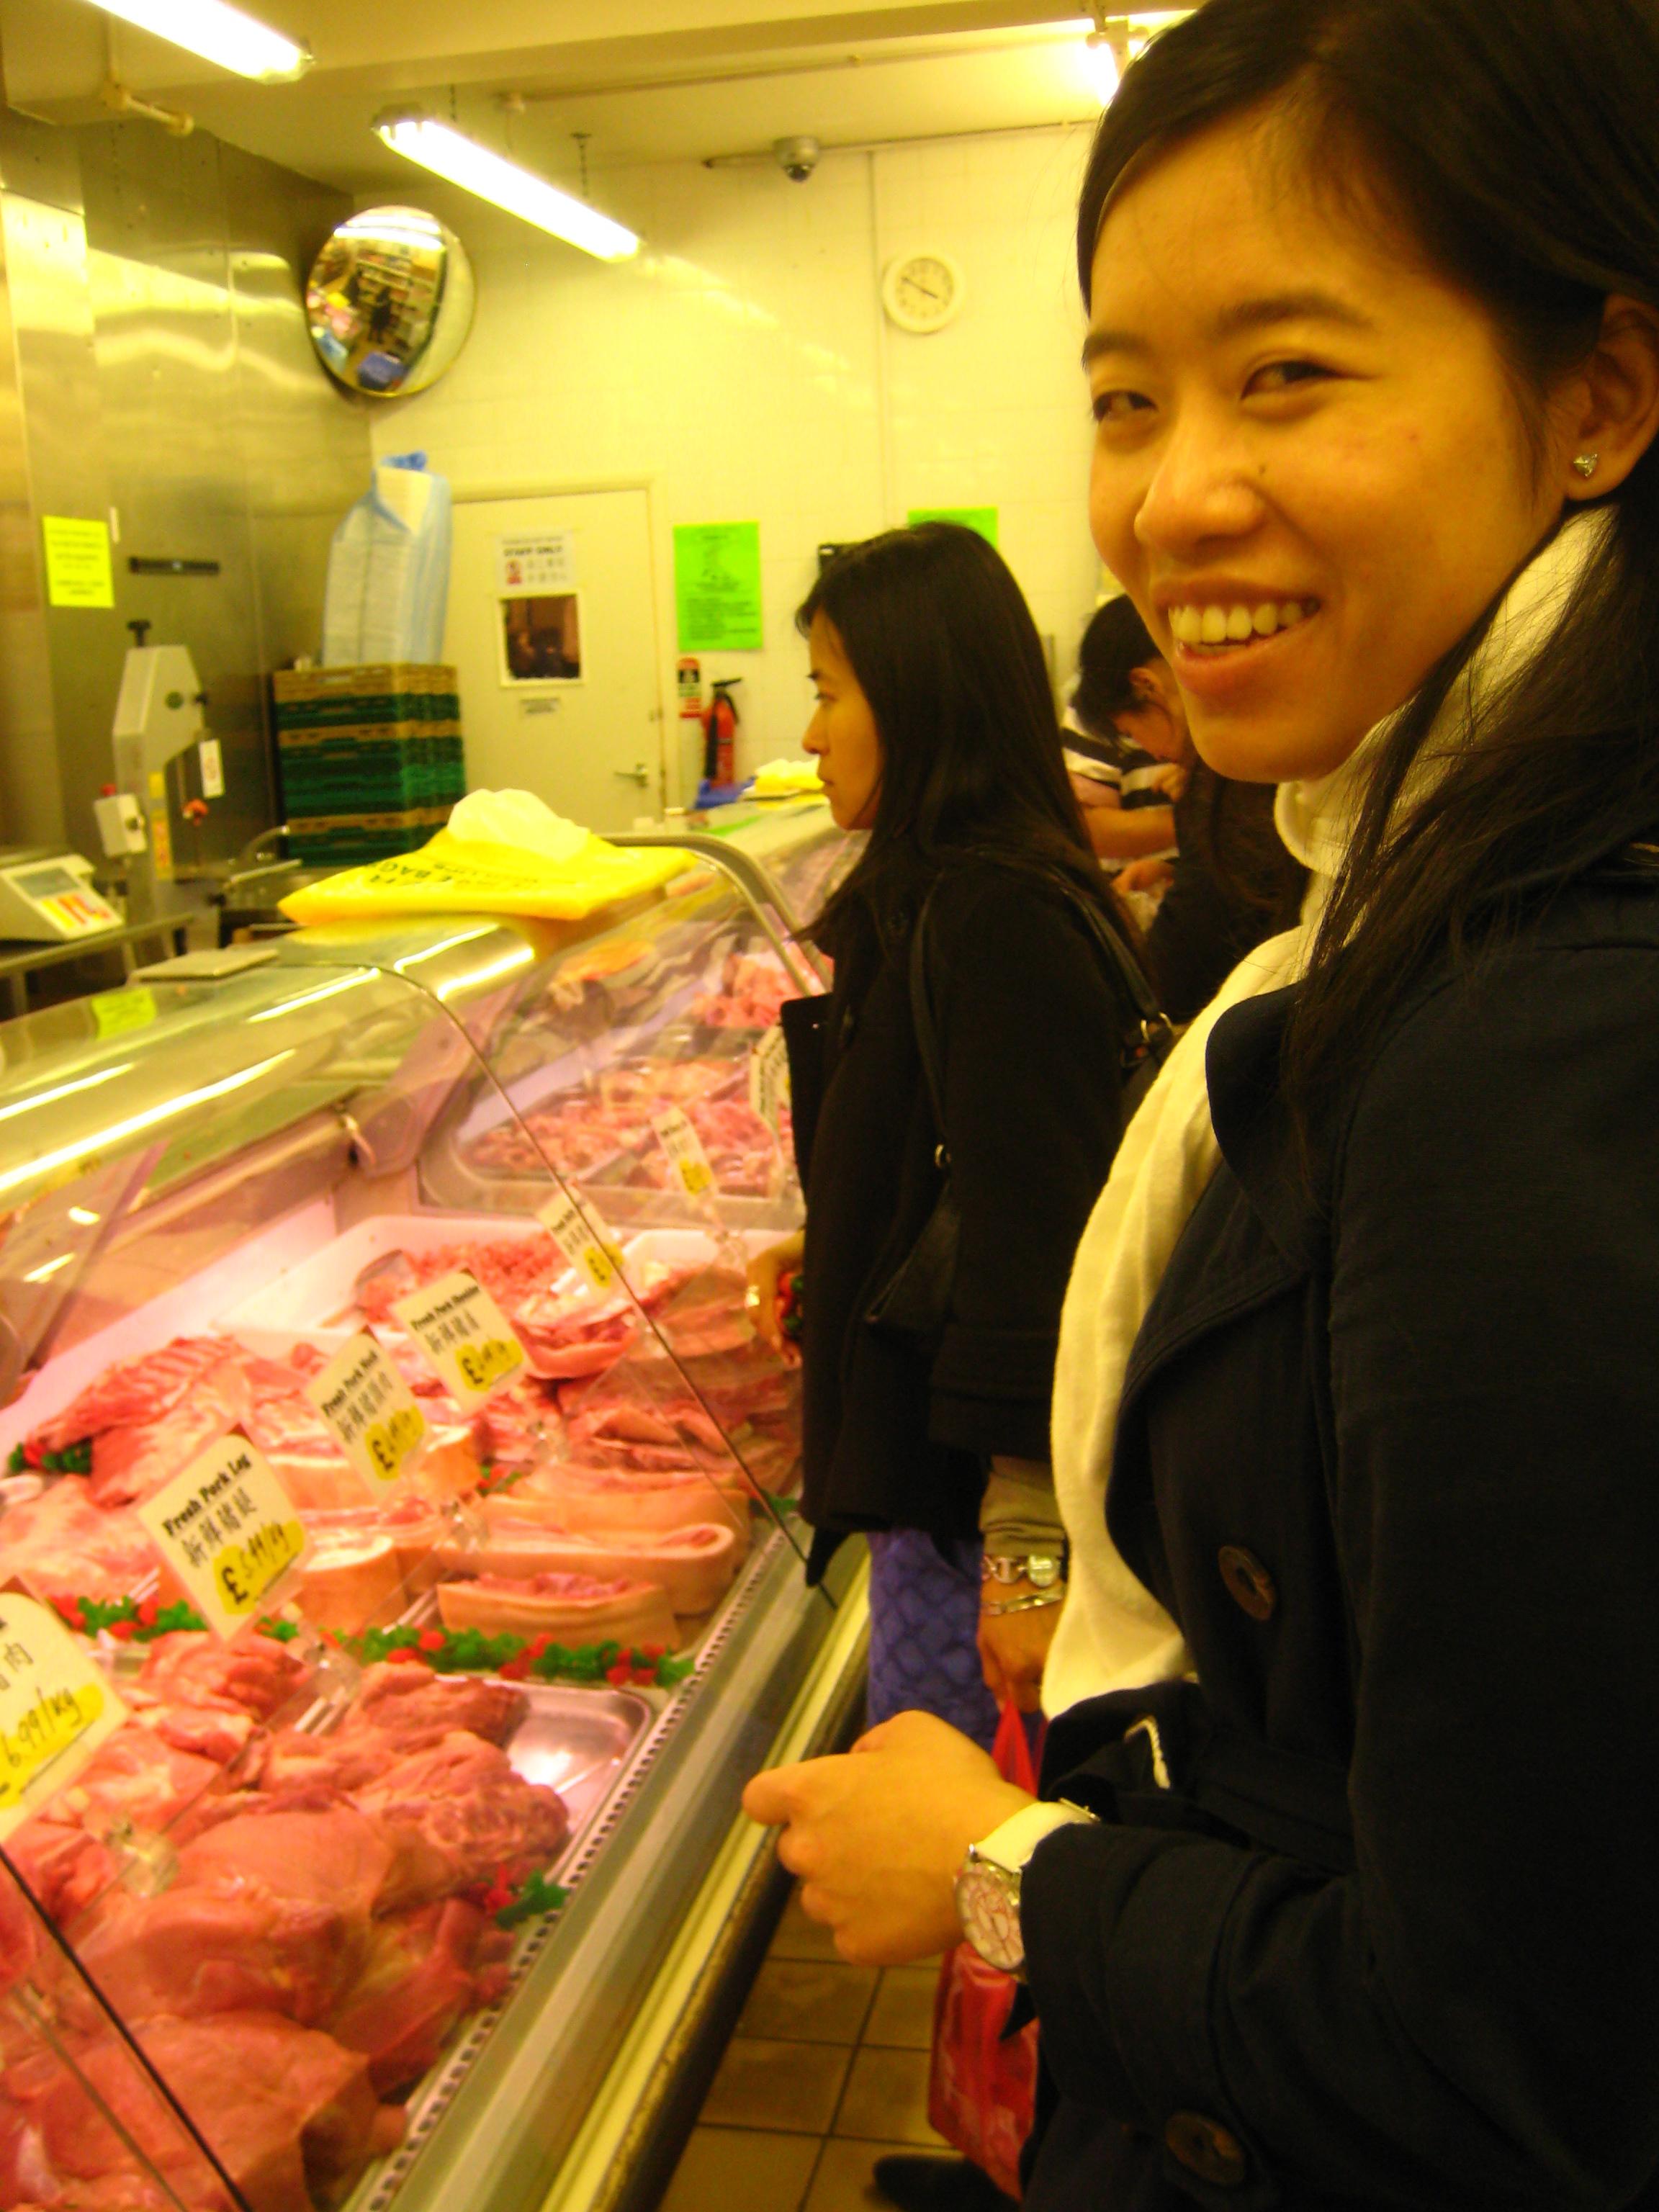 At the Butcher Section